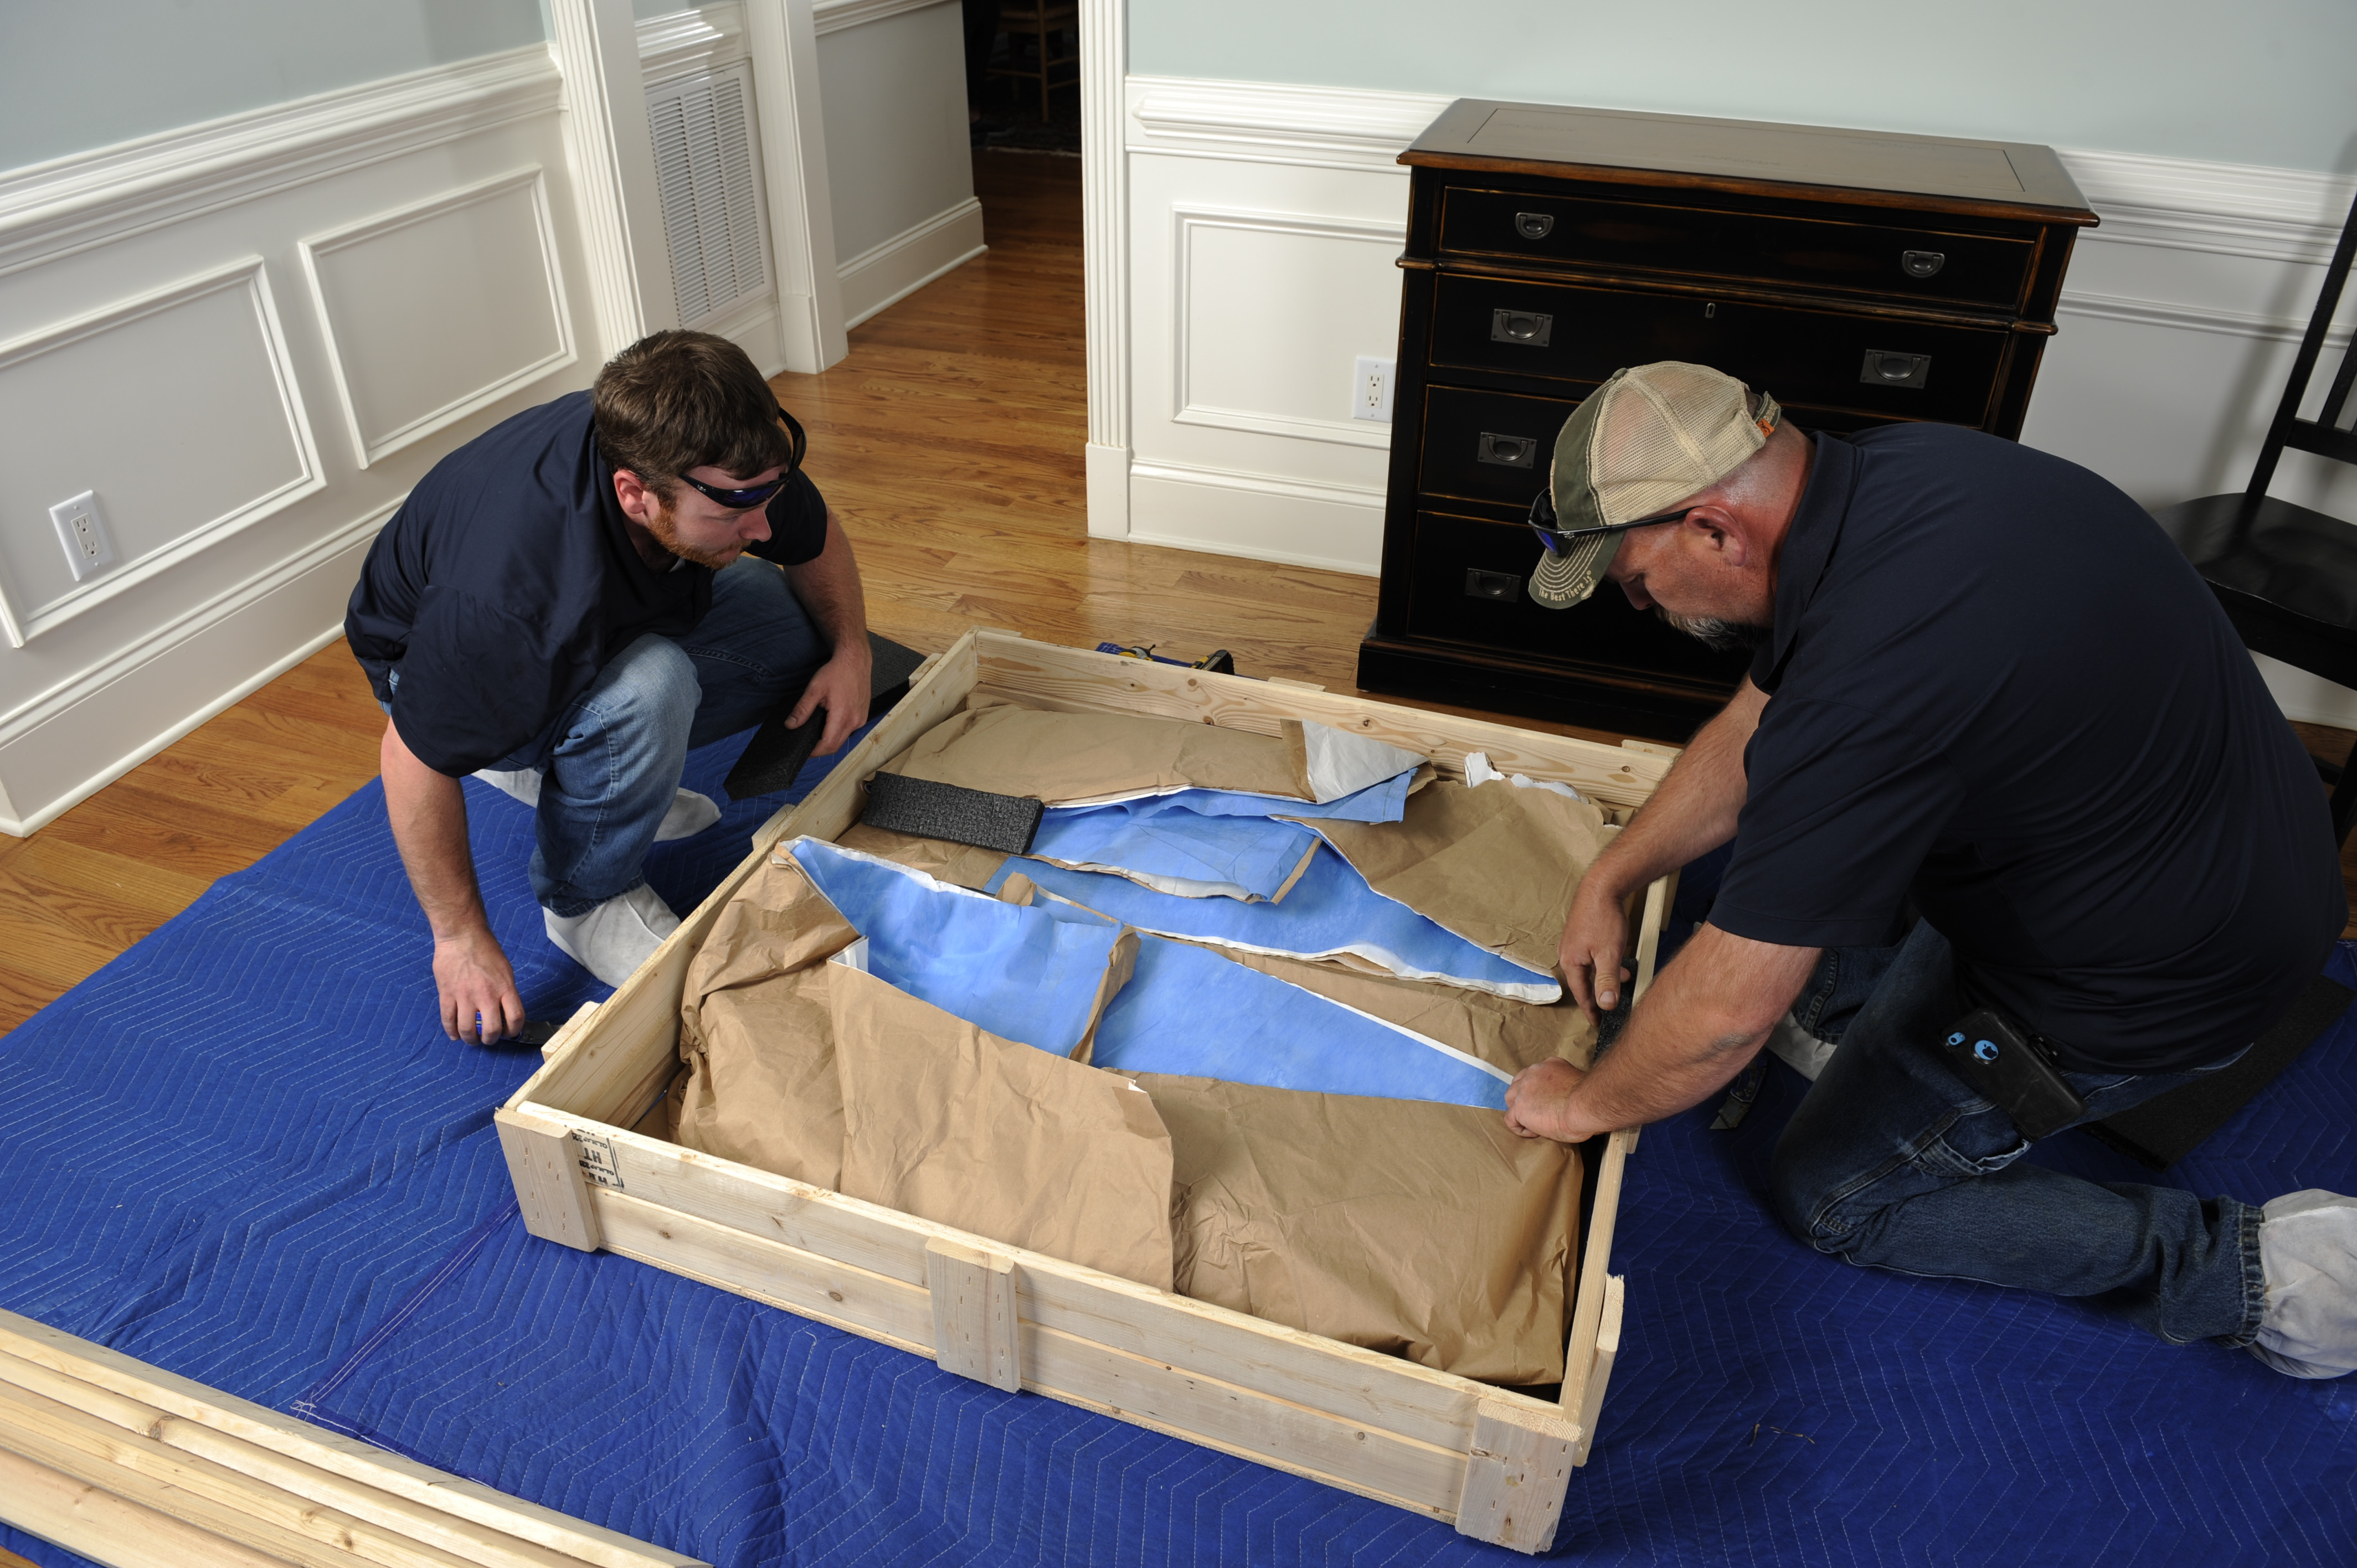 Two men packing belongings in to a crate